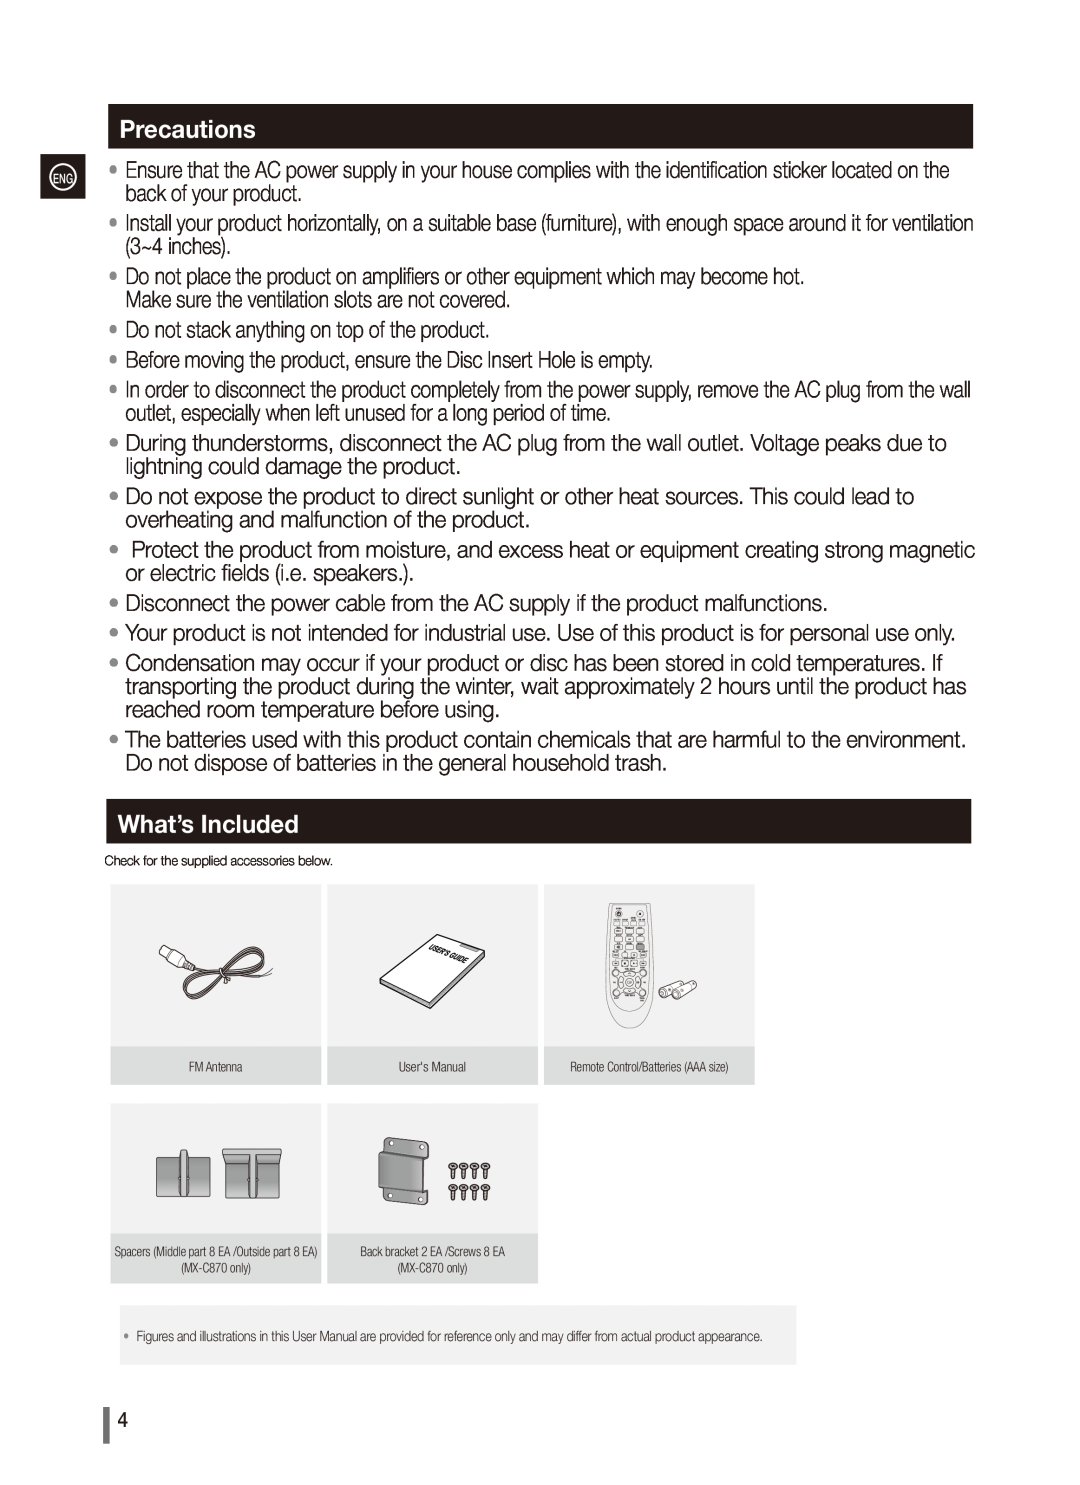 Samsung MX-C830, MX-C870, MX-C850, AH68-02265X user manual Precautions, What’s Included, back of your product 